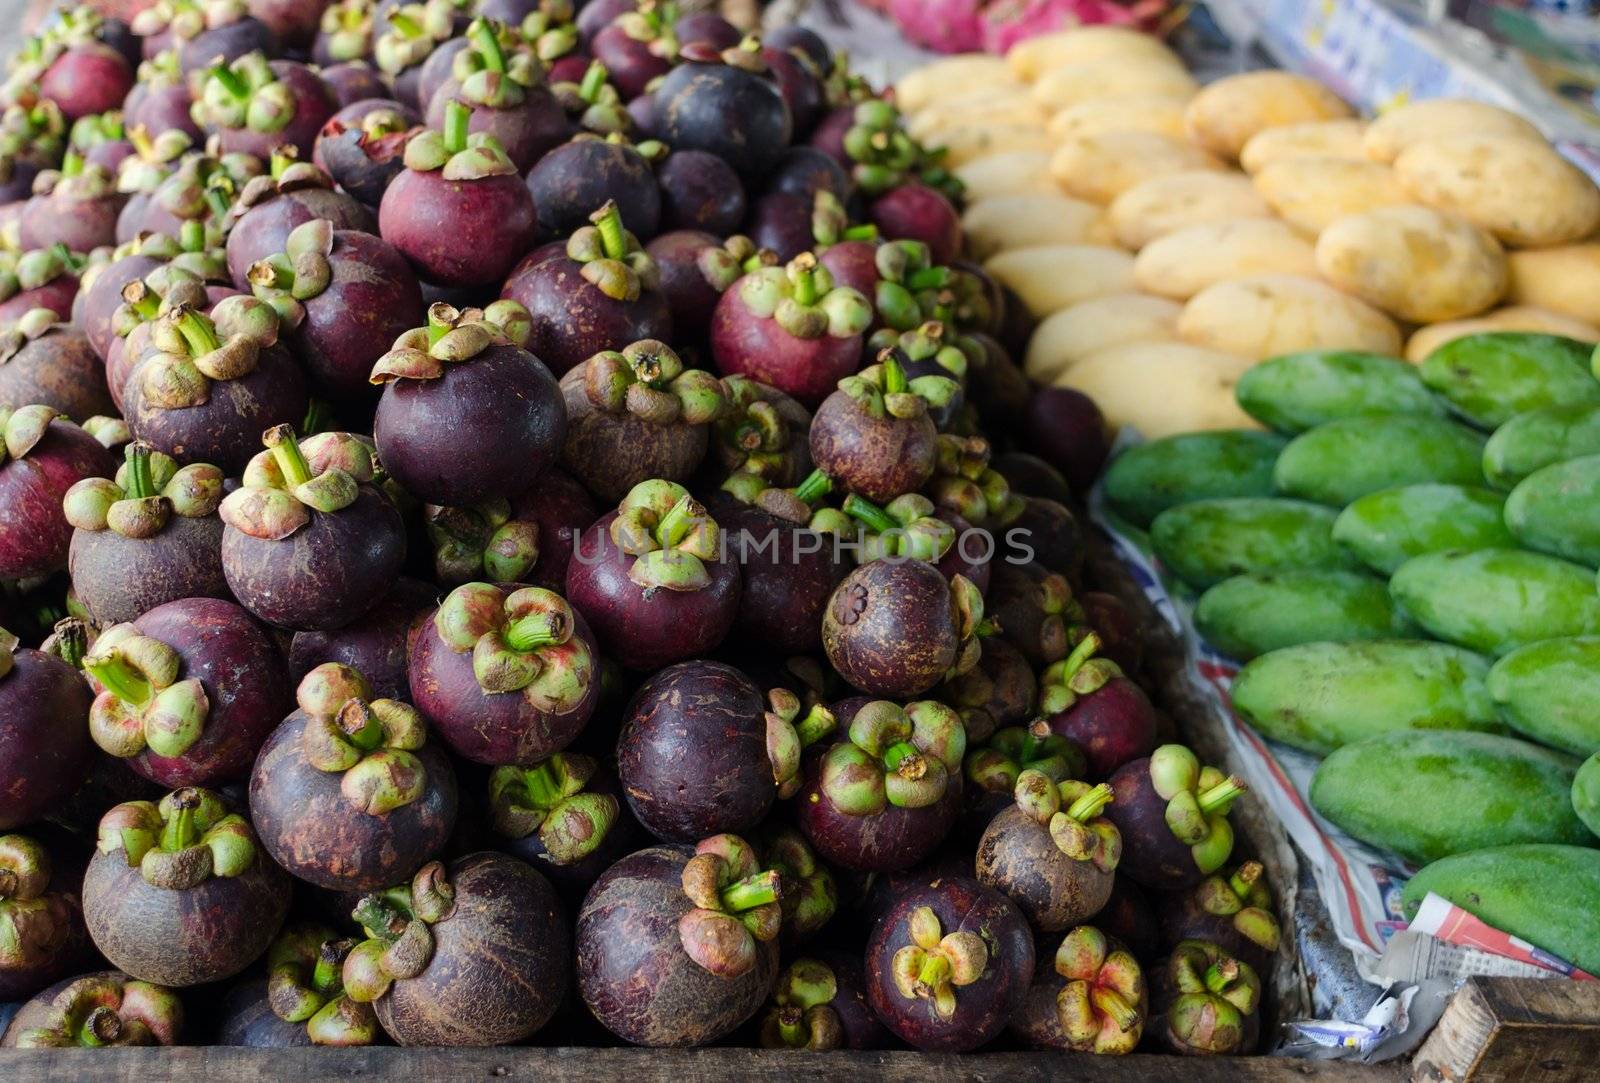 Asian open market with tropical fruits